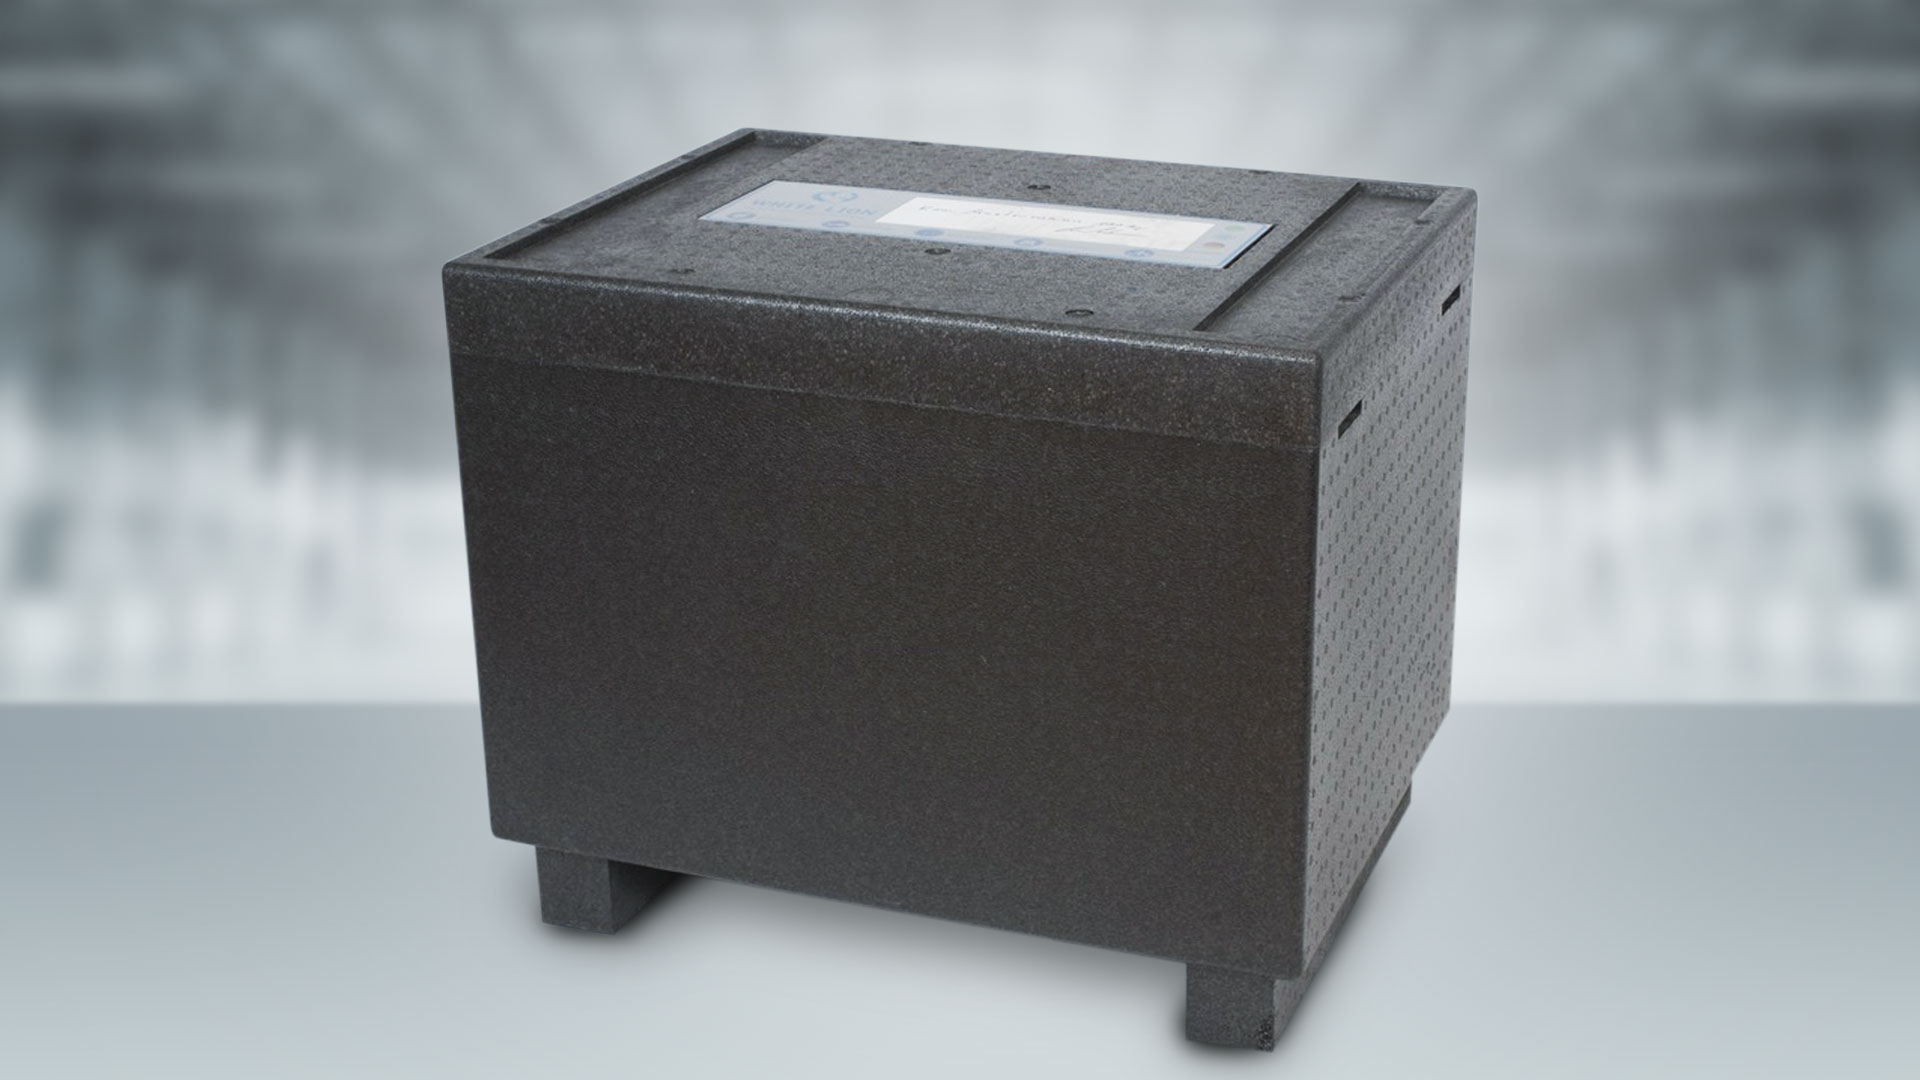 The dry ice container Black Box 100 is the lightest storage box in our assortment.